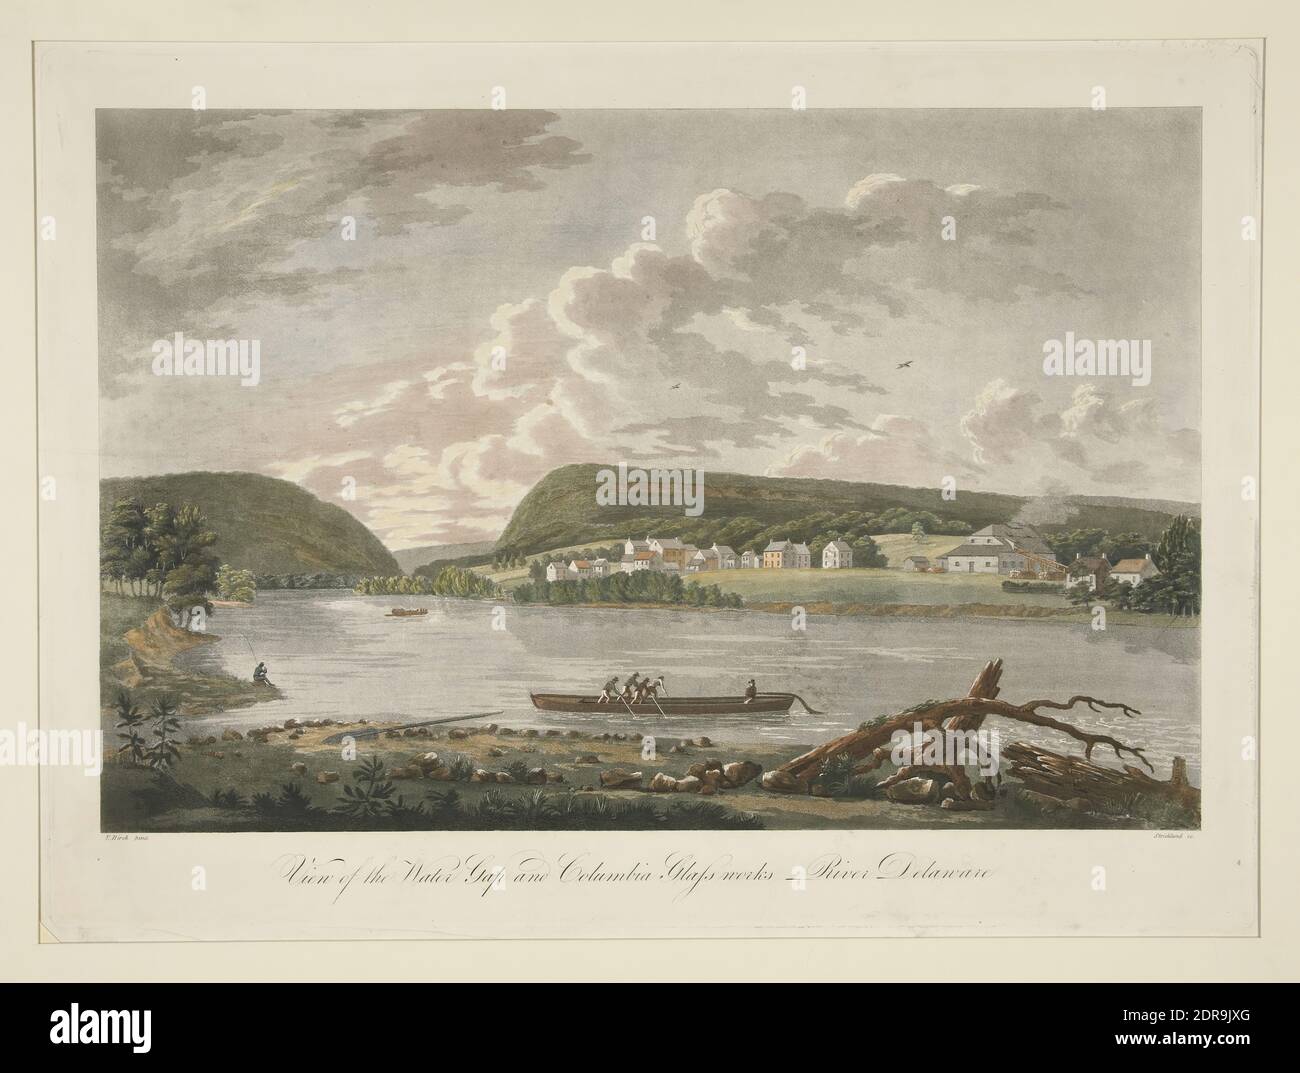 Artist: William Strickland, American, 1788–1854, After: Thomas Birch, American, born England, 1779–1851, View of the Water Gap and Columbian Glassworks, River Delaware, Colored aquatint. Pasted flat on cardboard., 41.6 × 56.5 cm (16 3/8 × 22 1/4 in.), Made in United States, American, 19th century, Works on Paper - Prints Stock Photo